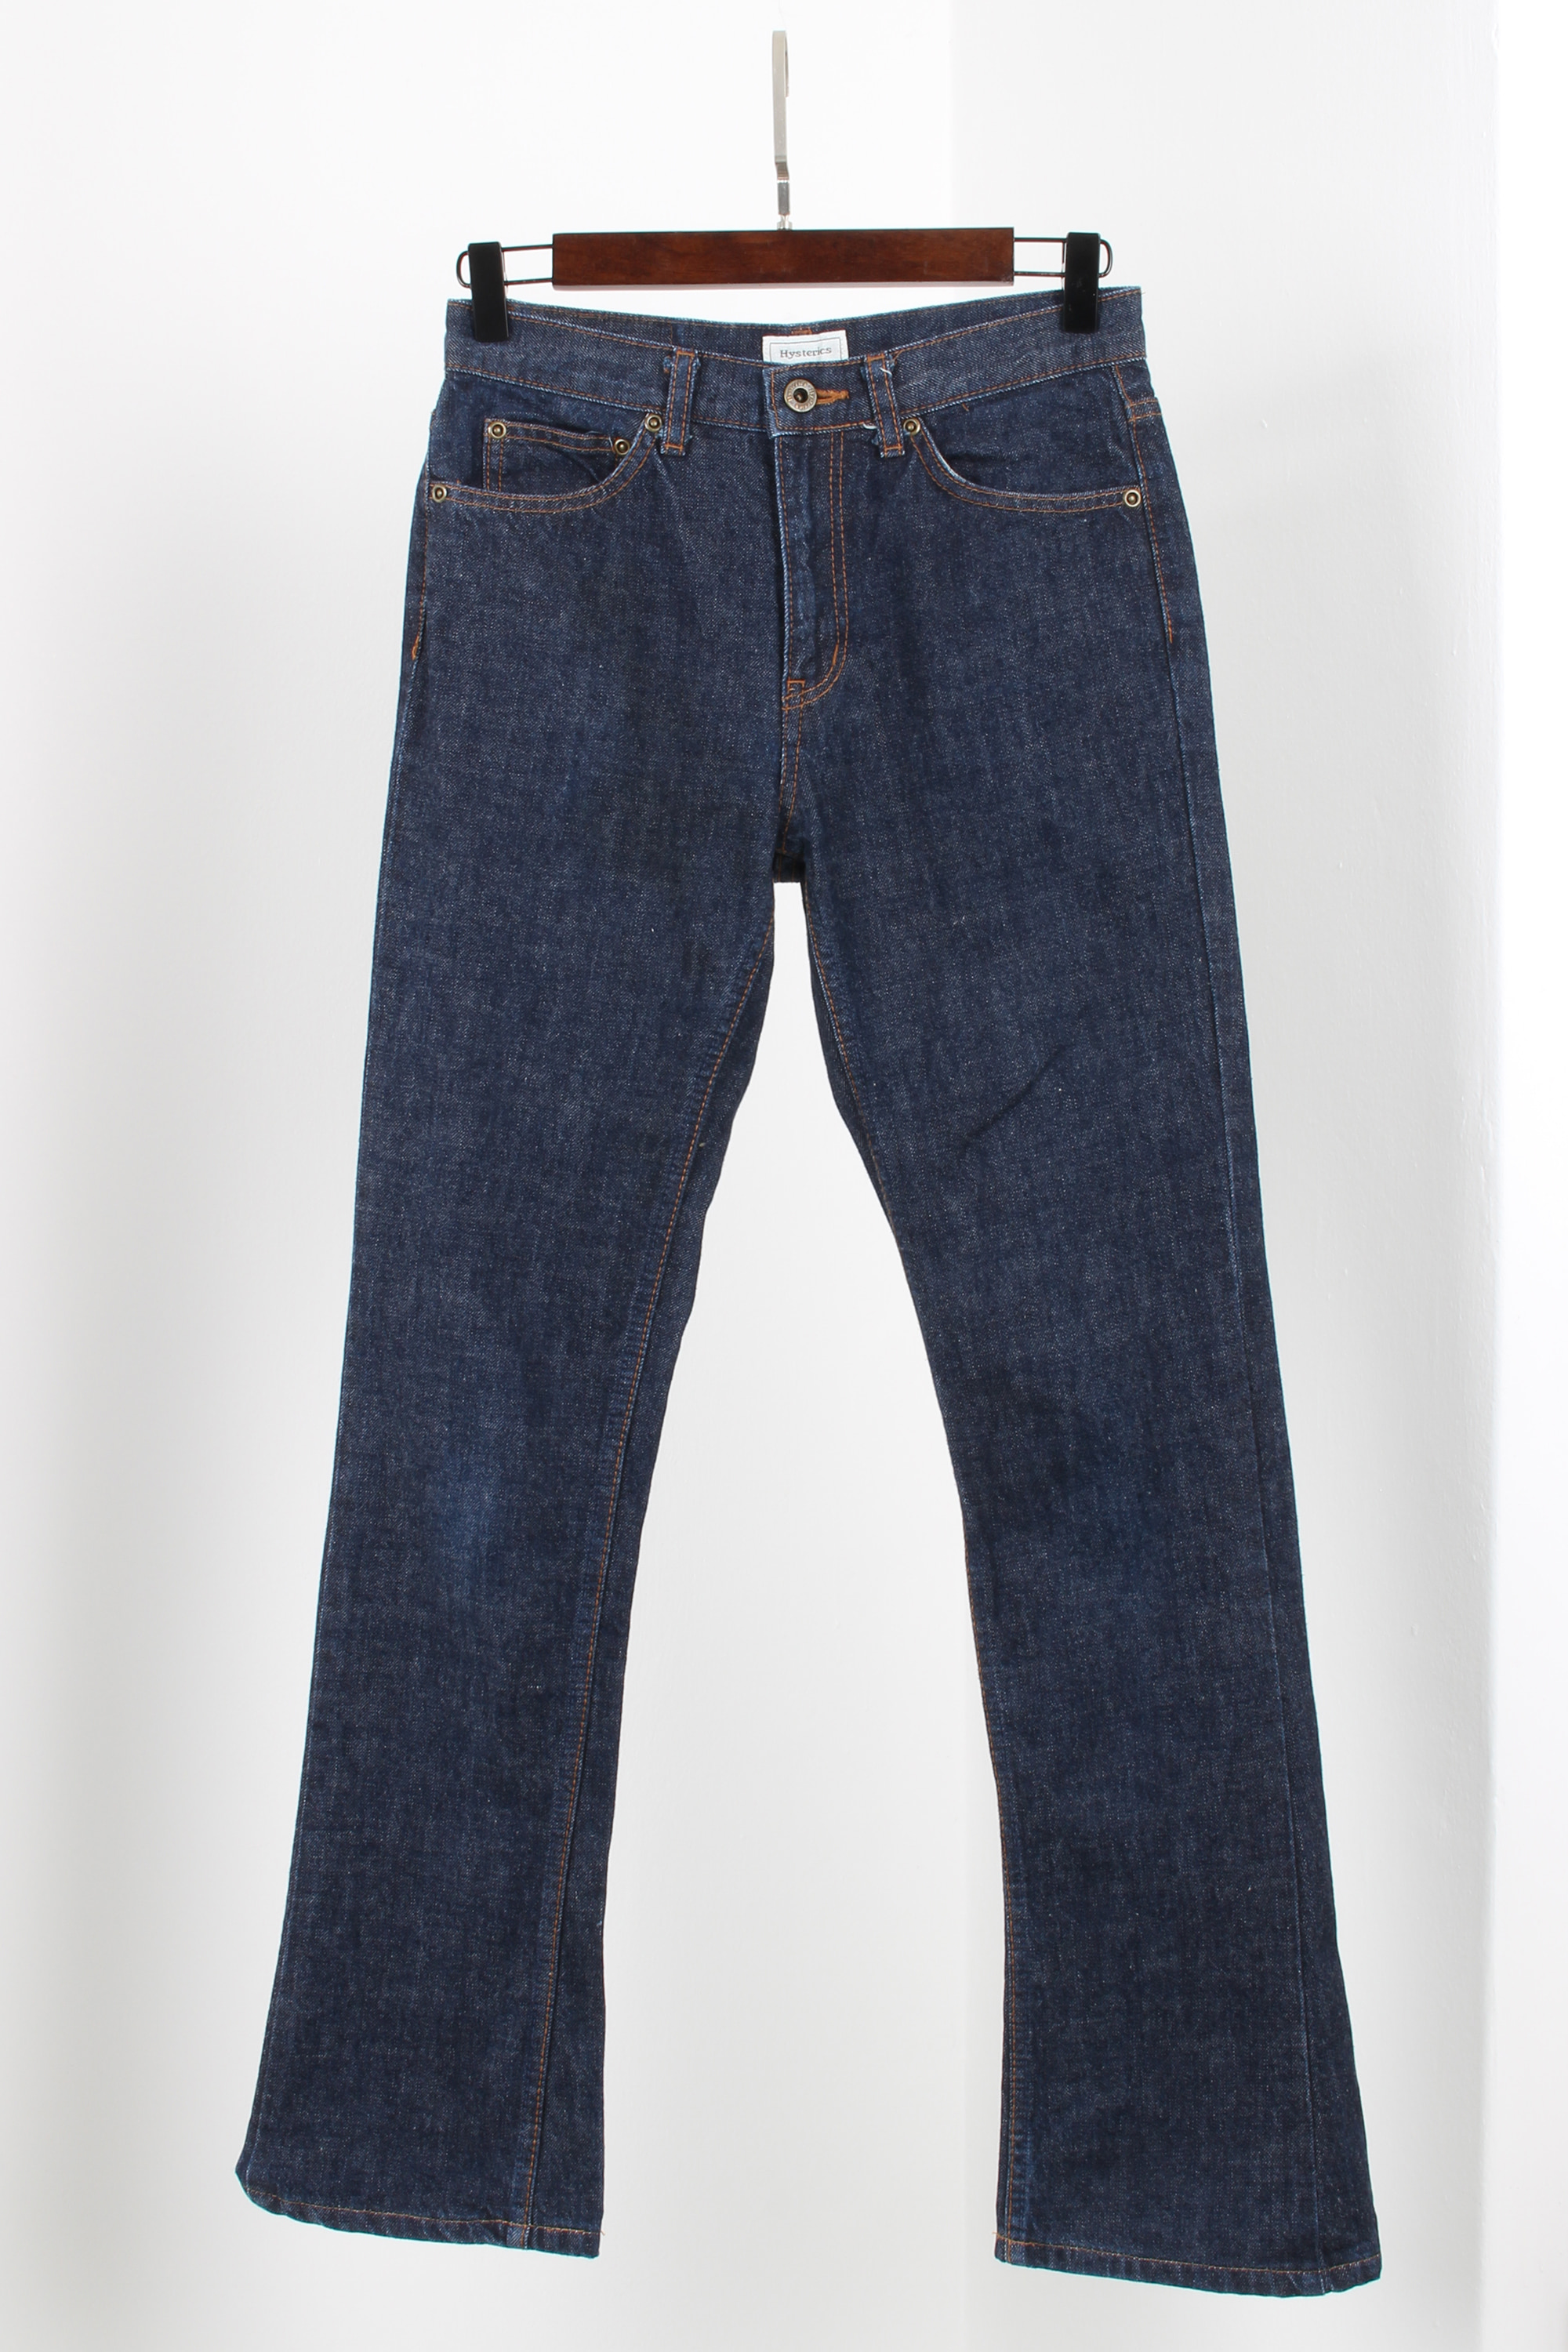 hysteric glamour Non washed Jeans